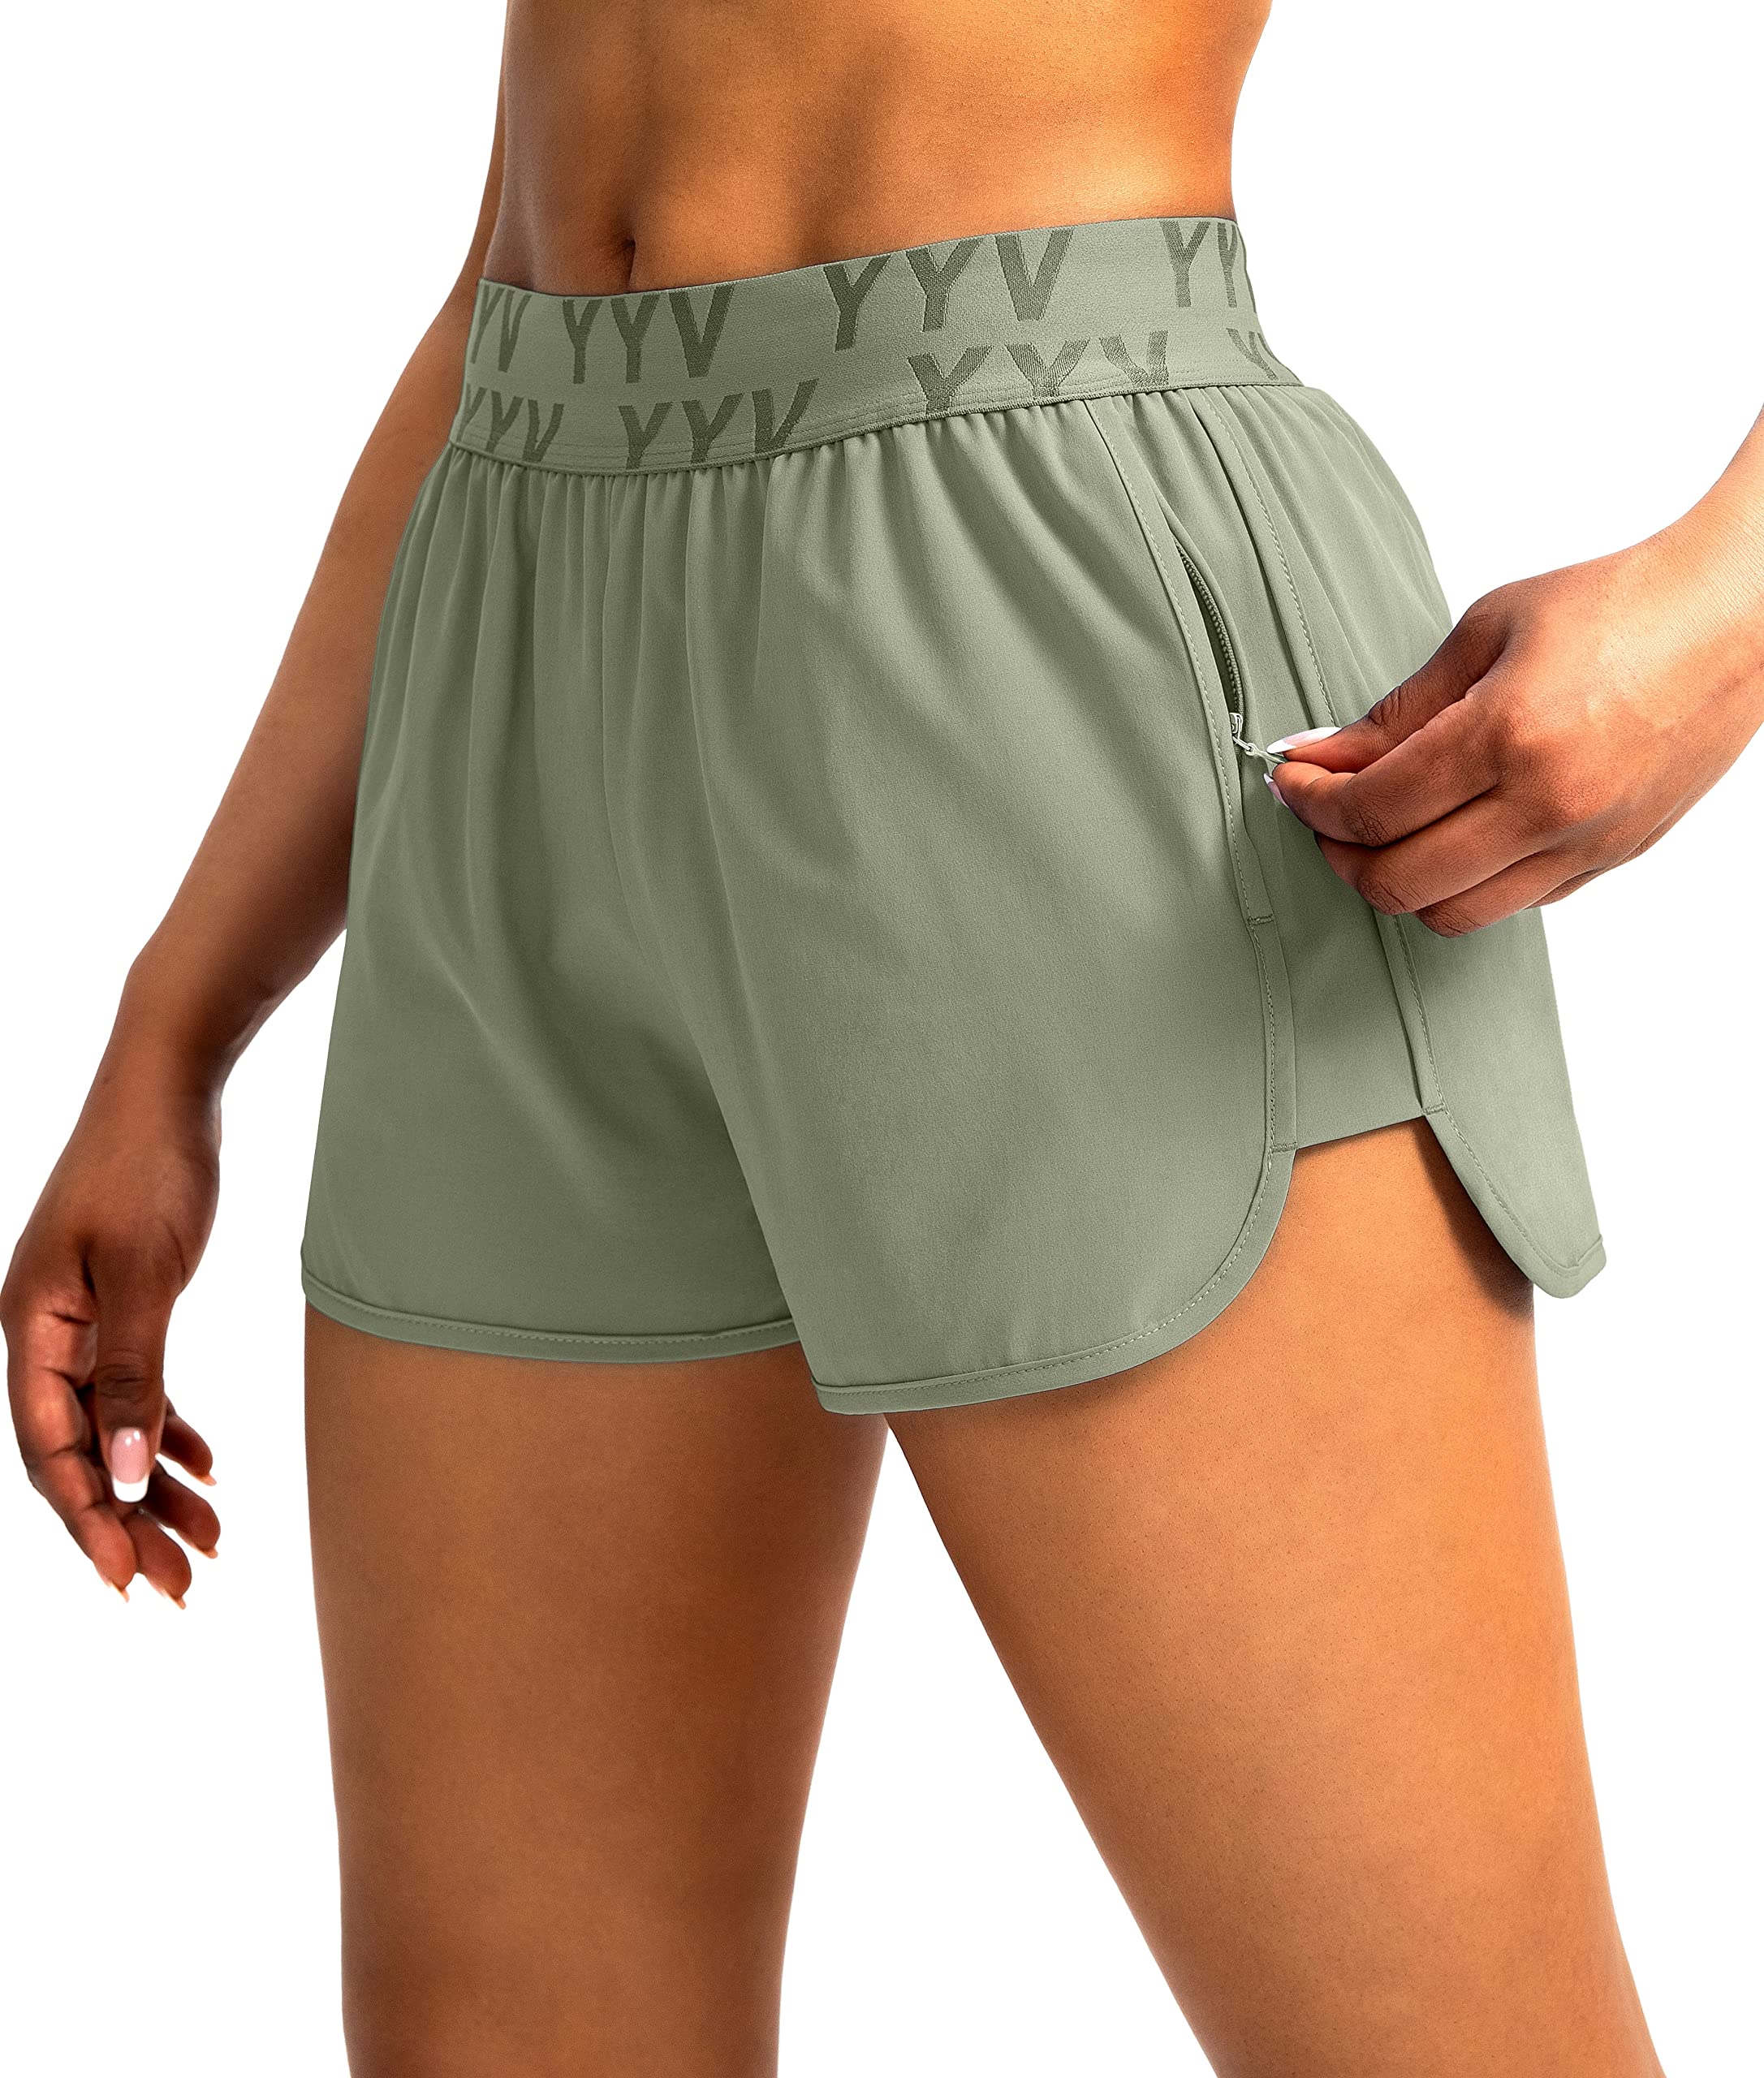 SHEWEE Shorts - Technical, Breathable Underwear For Walking Running Gym  Women UK